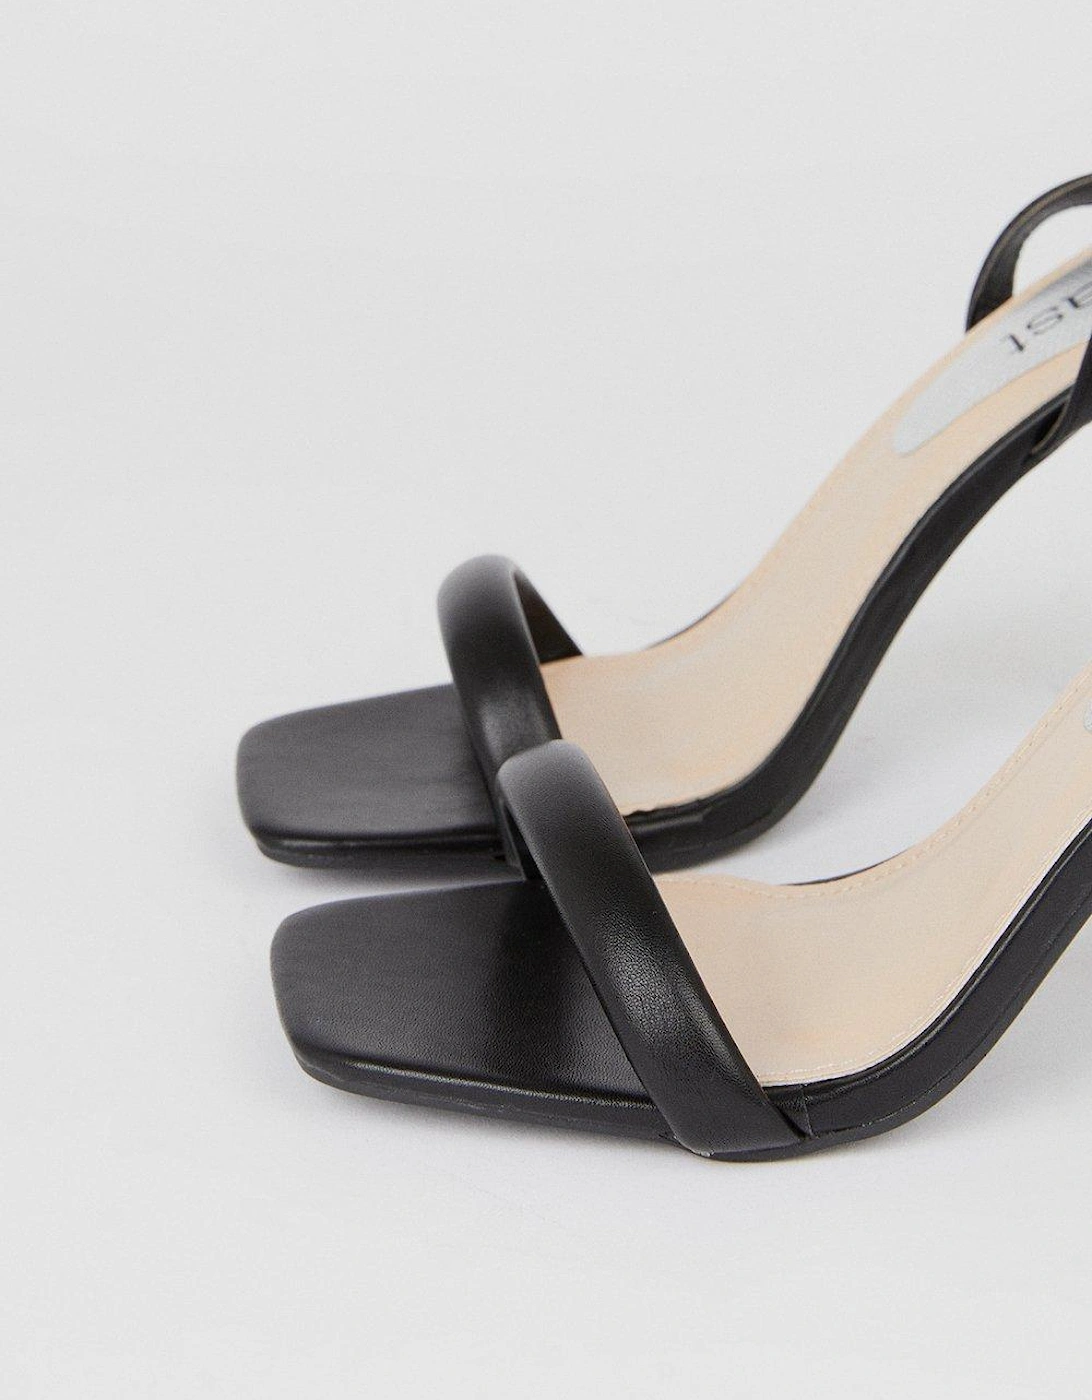 Tiana Barely There Heel Sandals